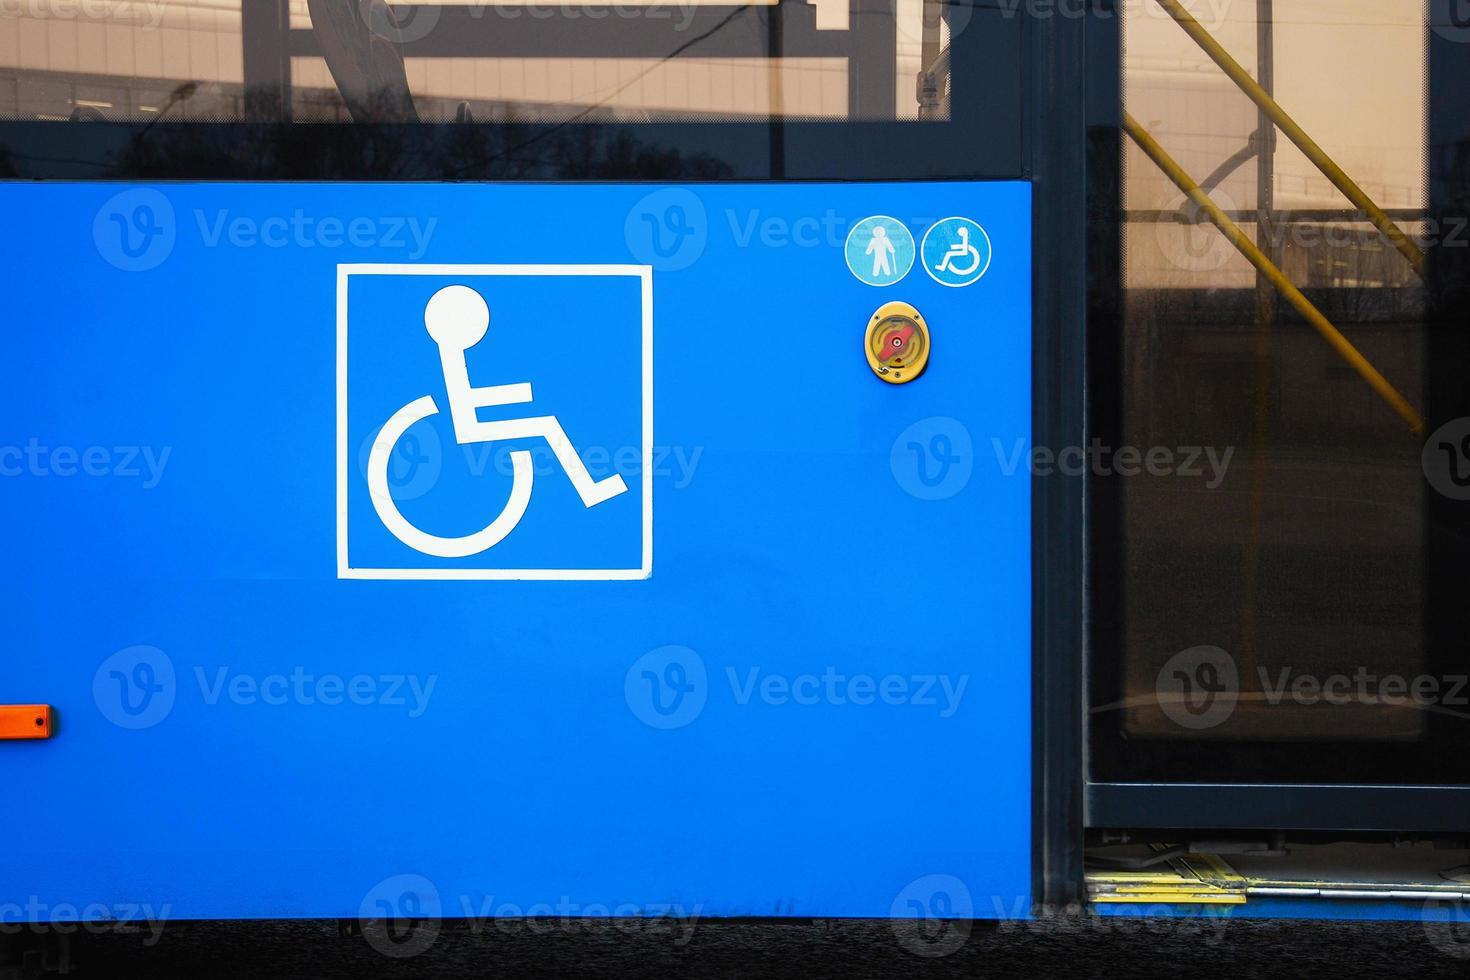 Public transport for all passengers, disabled person sign on city bus photo